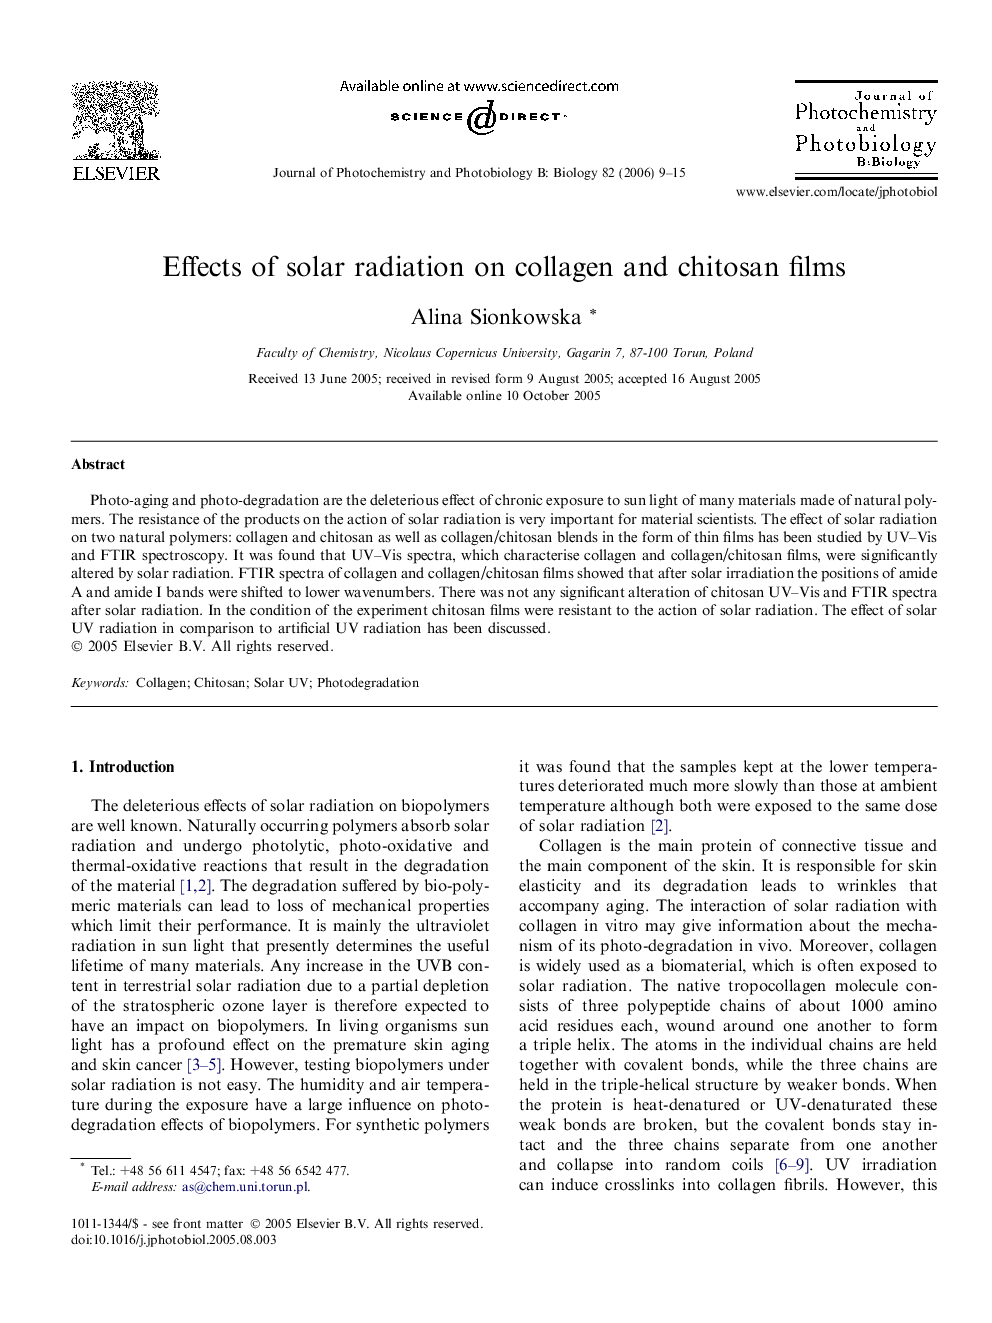 Effects of solar radiation on collagen and chitosan films